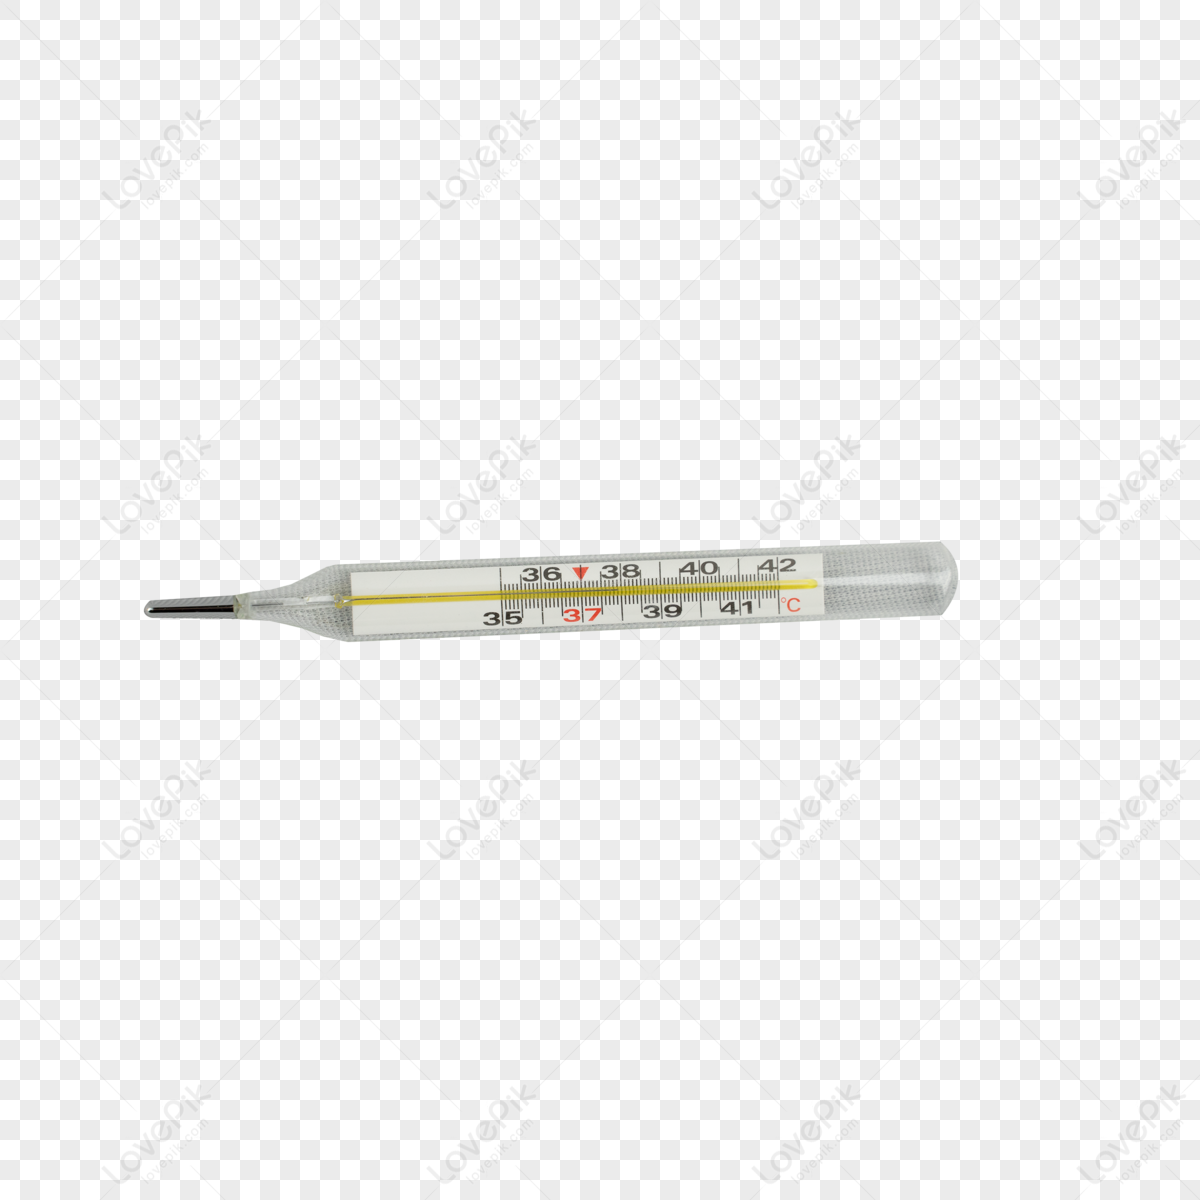 Doctor Instrument PNG Images With Transparent Background | Free ...